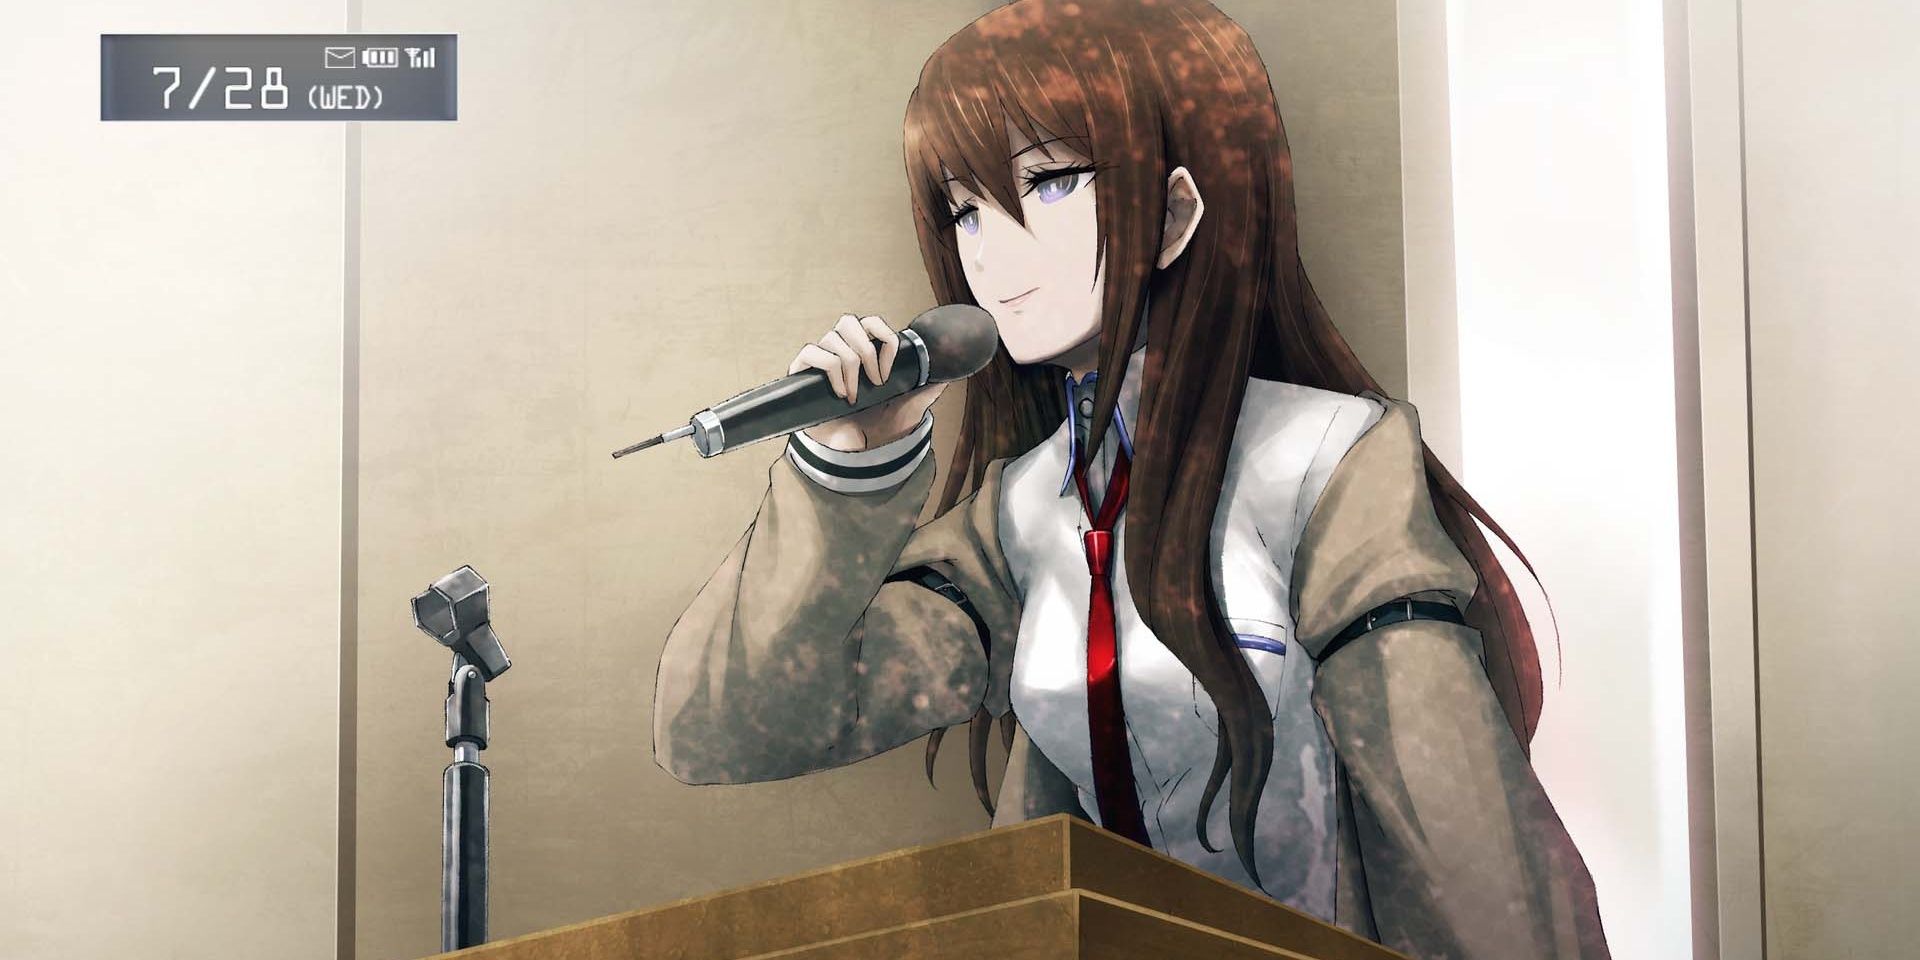 Makise Kurisu gives a lecture in the Steins Gate visual novel